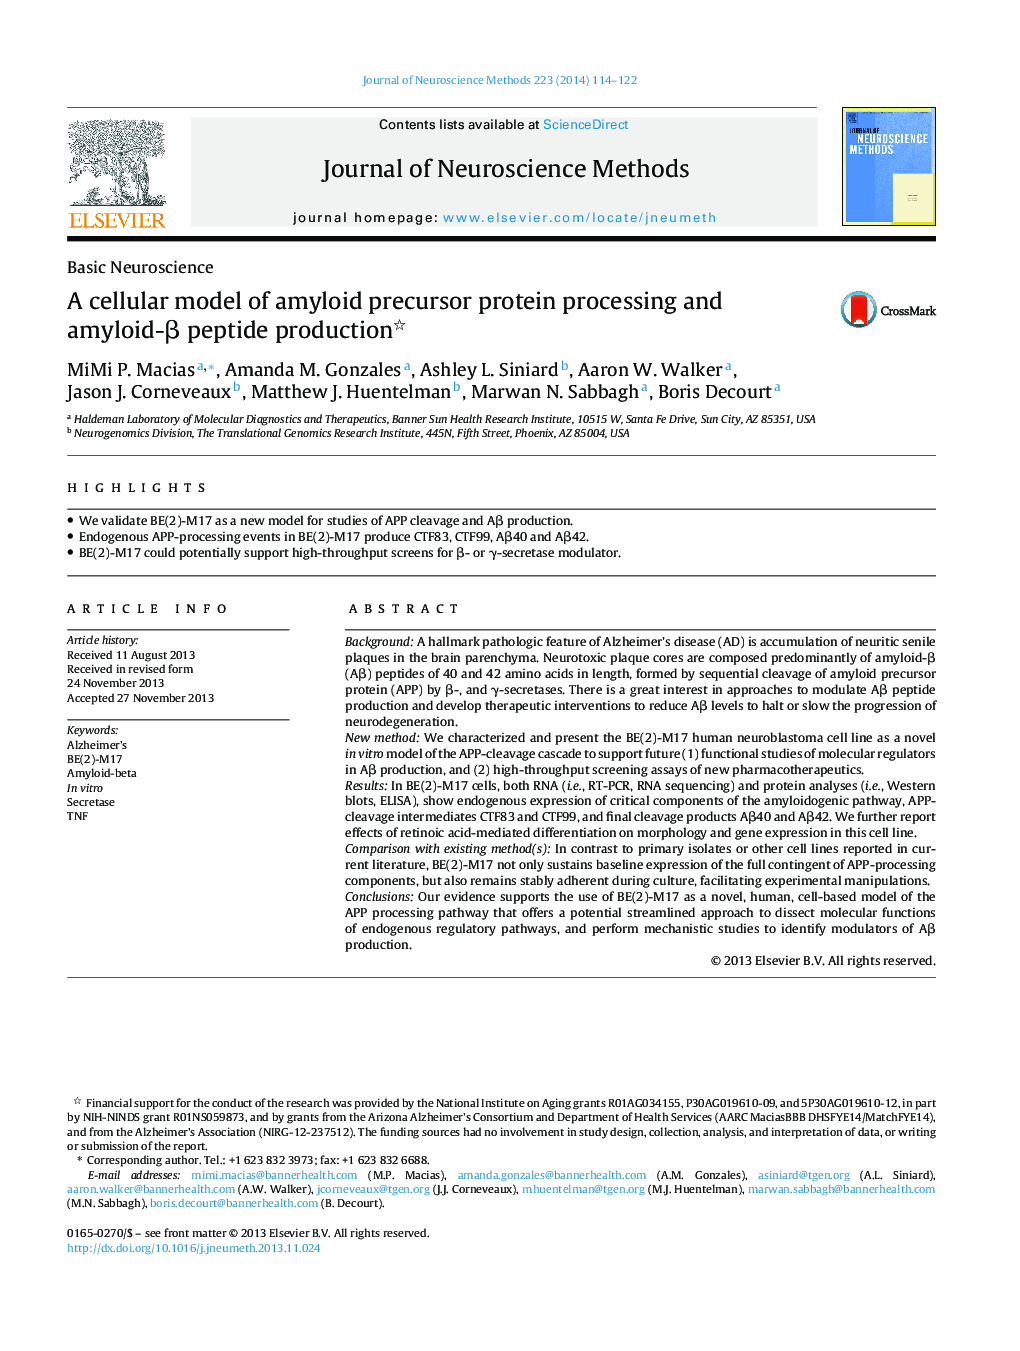 A cellular model of amyloid precursor protein processing and amyloid-β peptide production 